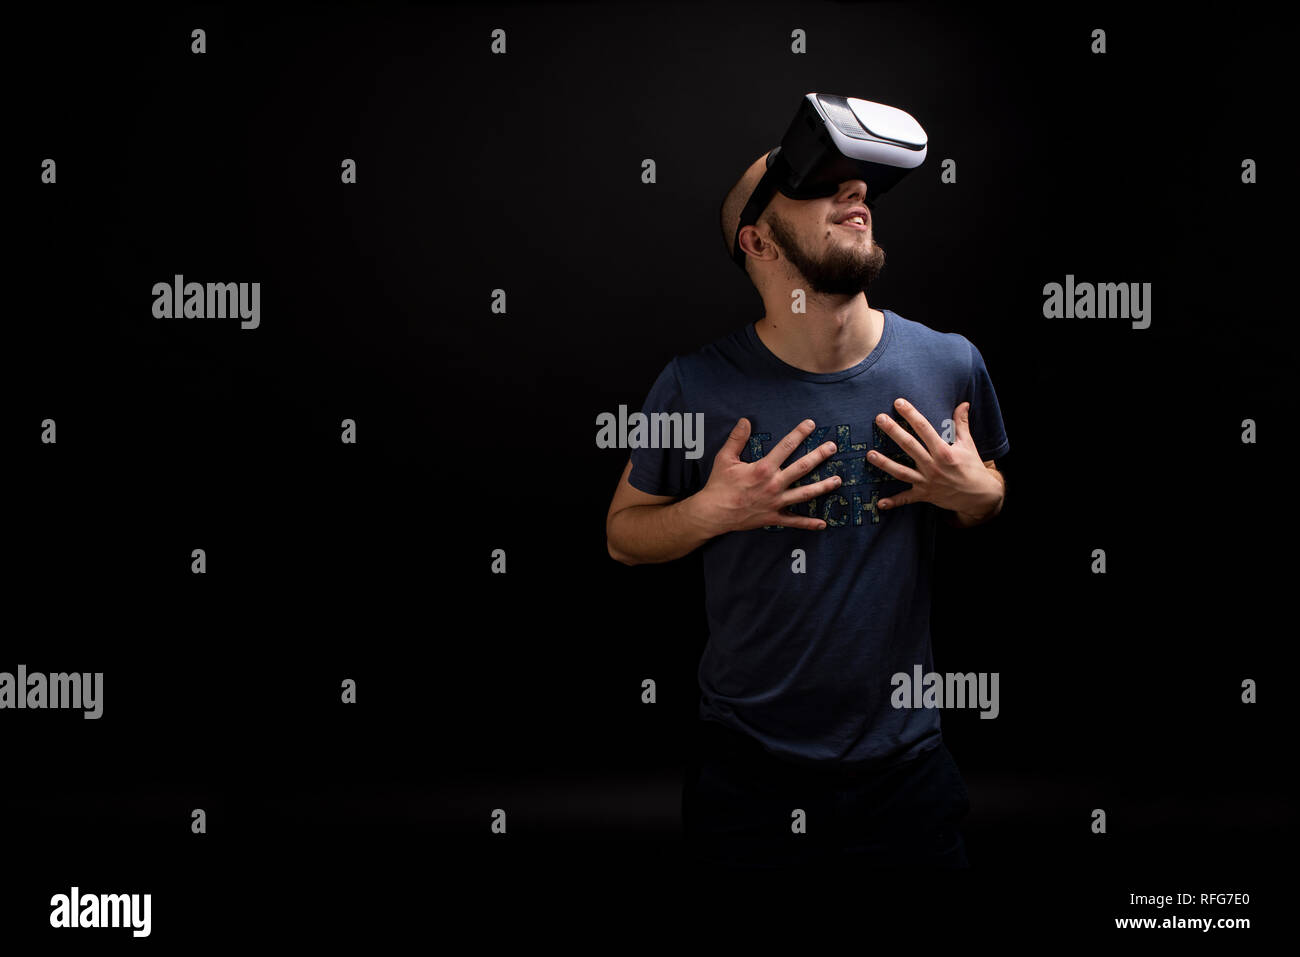 Male touching chest with both hands while using a VR gadget. Hi-tech futuristic innovation portrait shot in studio. Copy space available Stock Photo